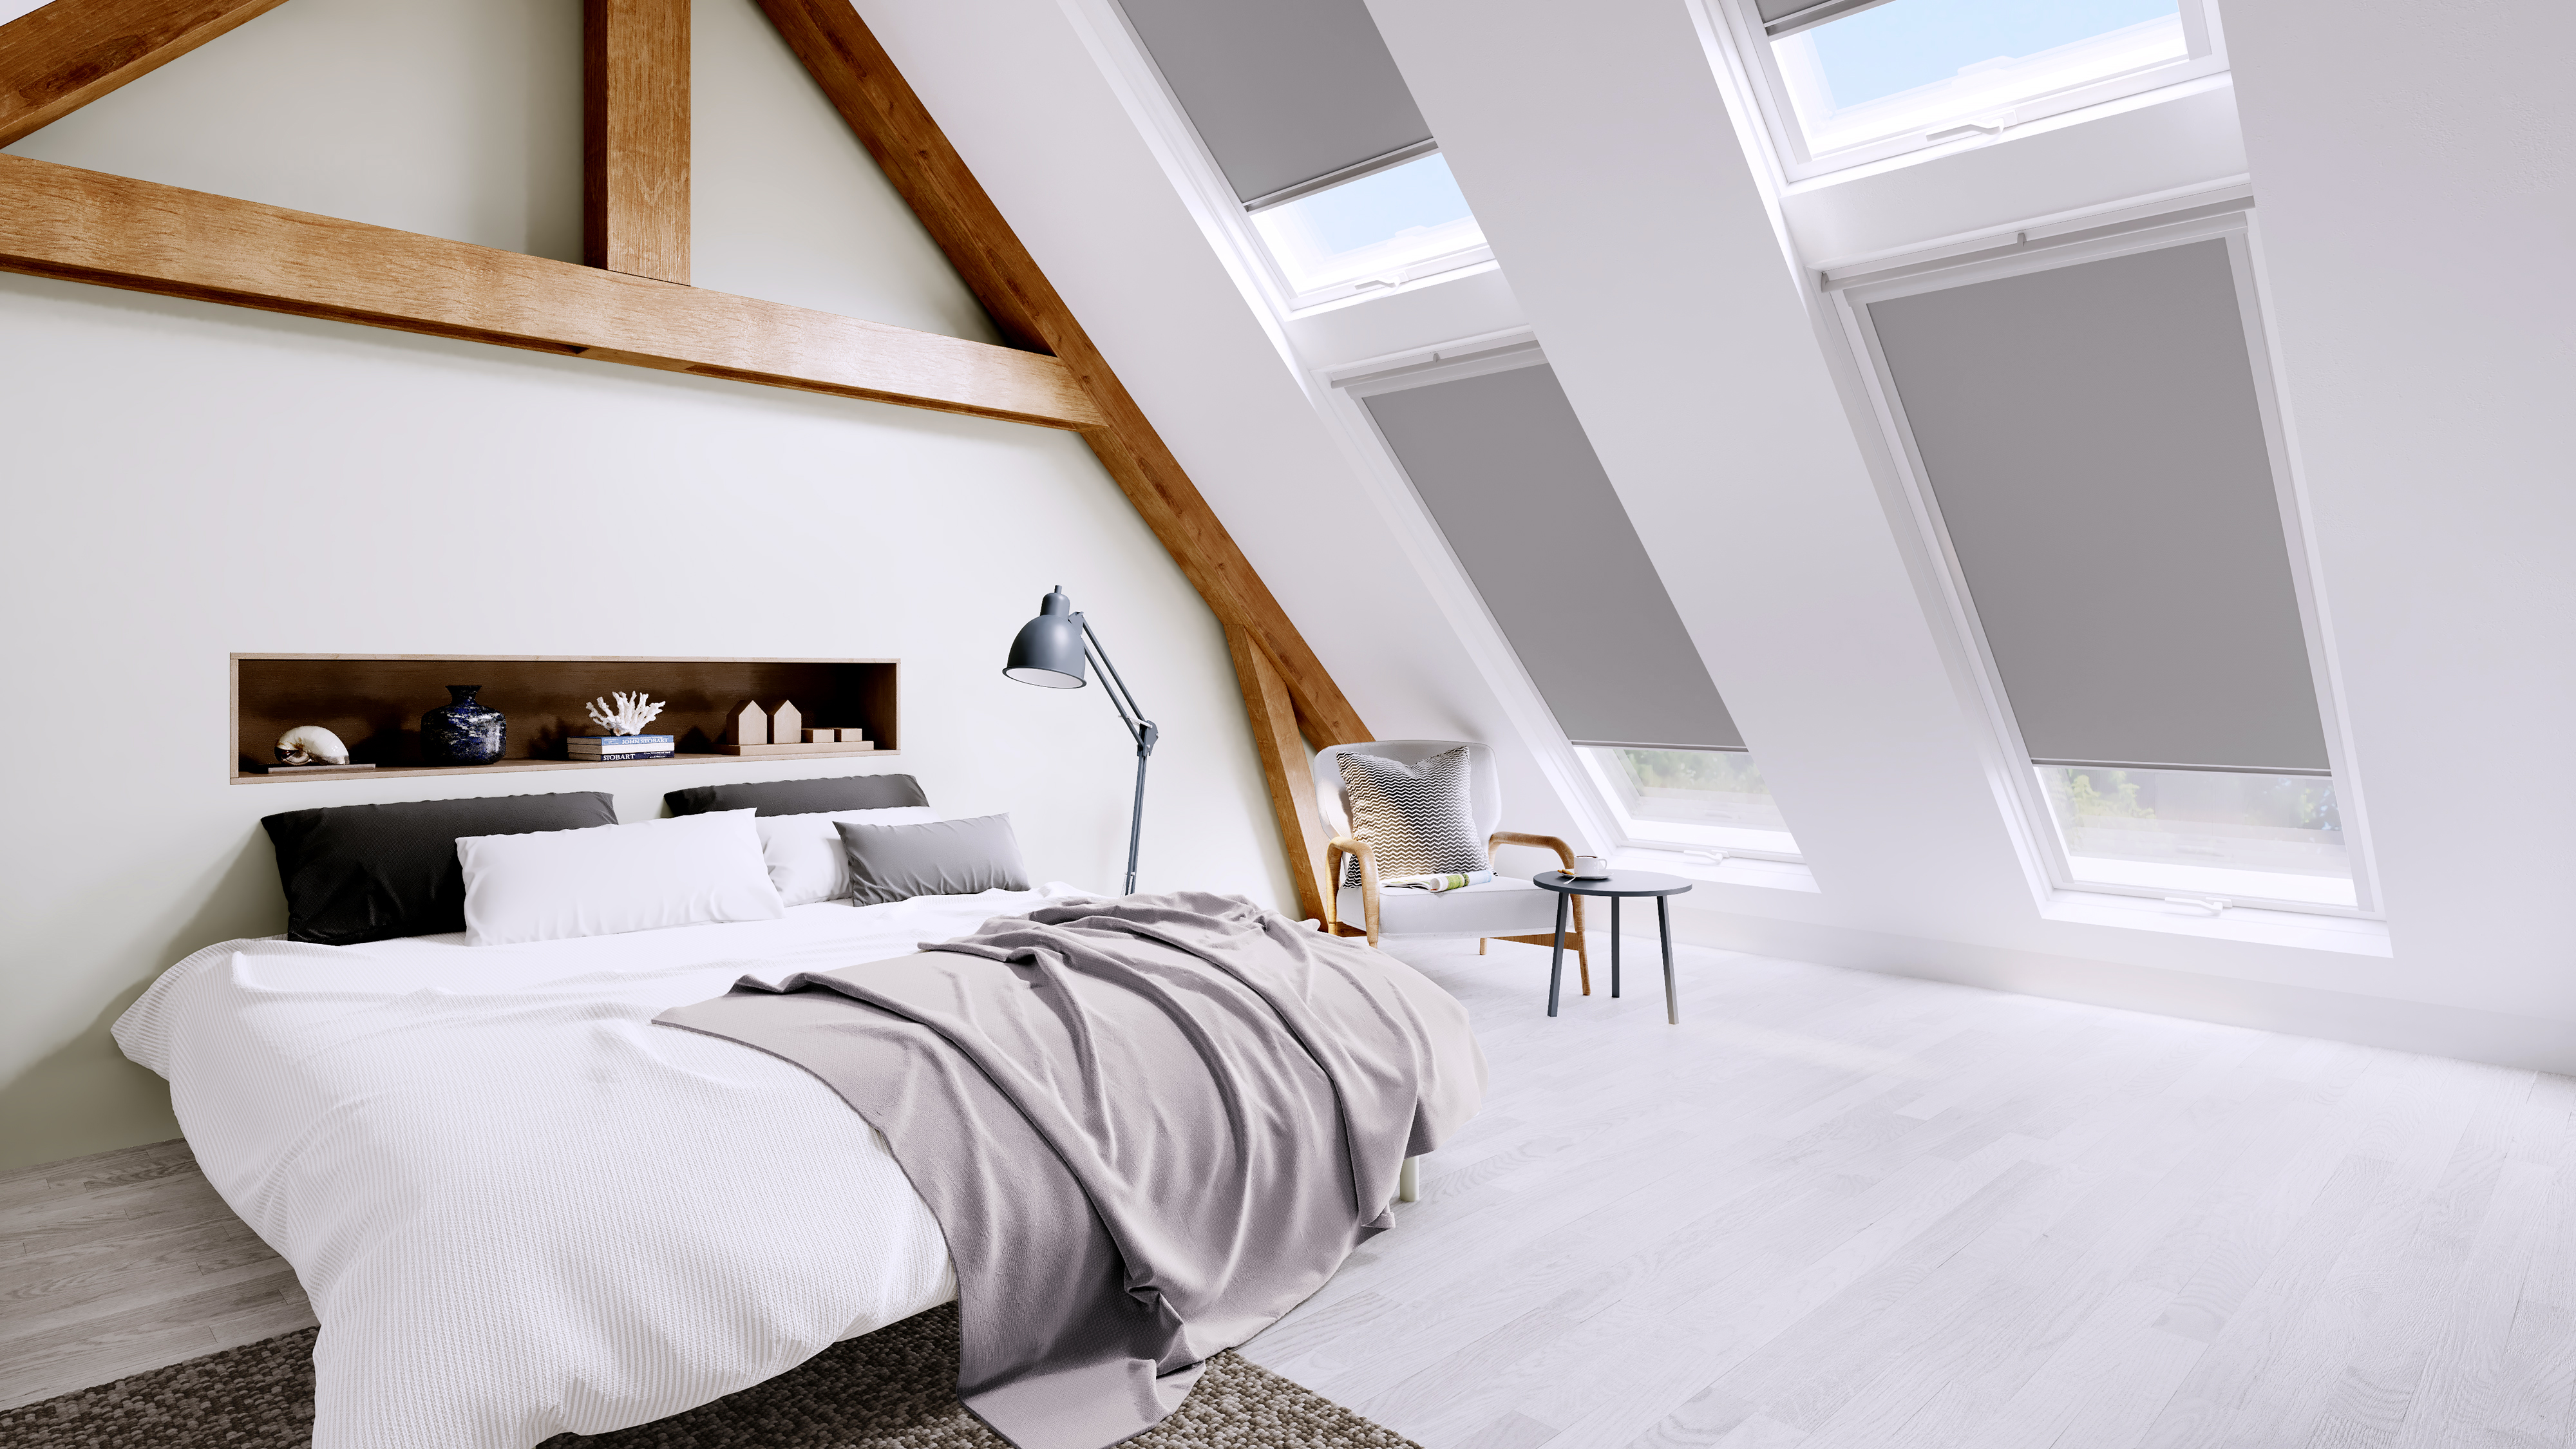 A guide to planning a loft conversion in 2022 | Real Homes